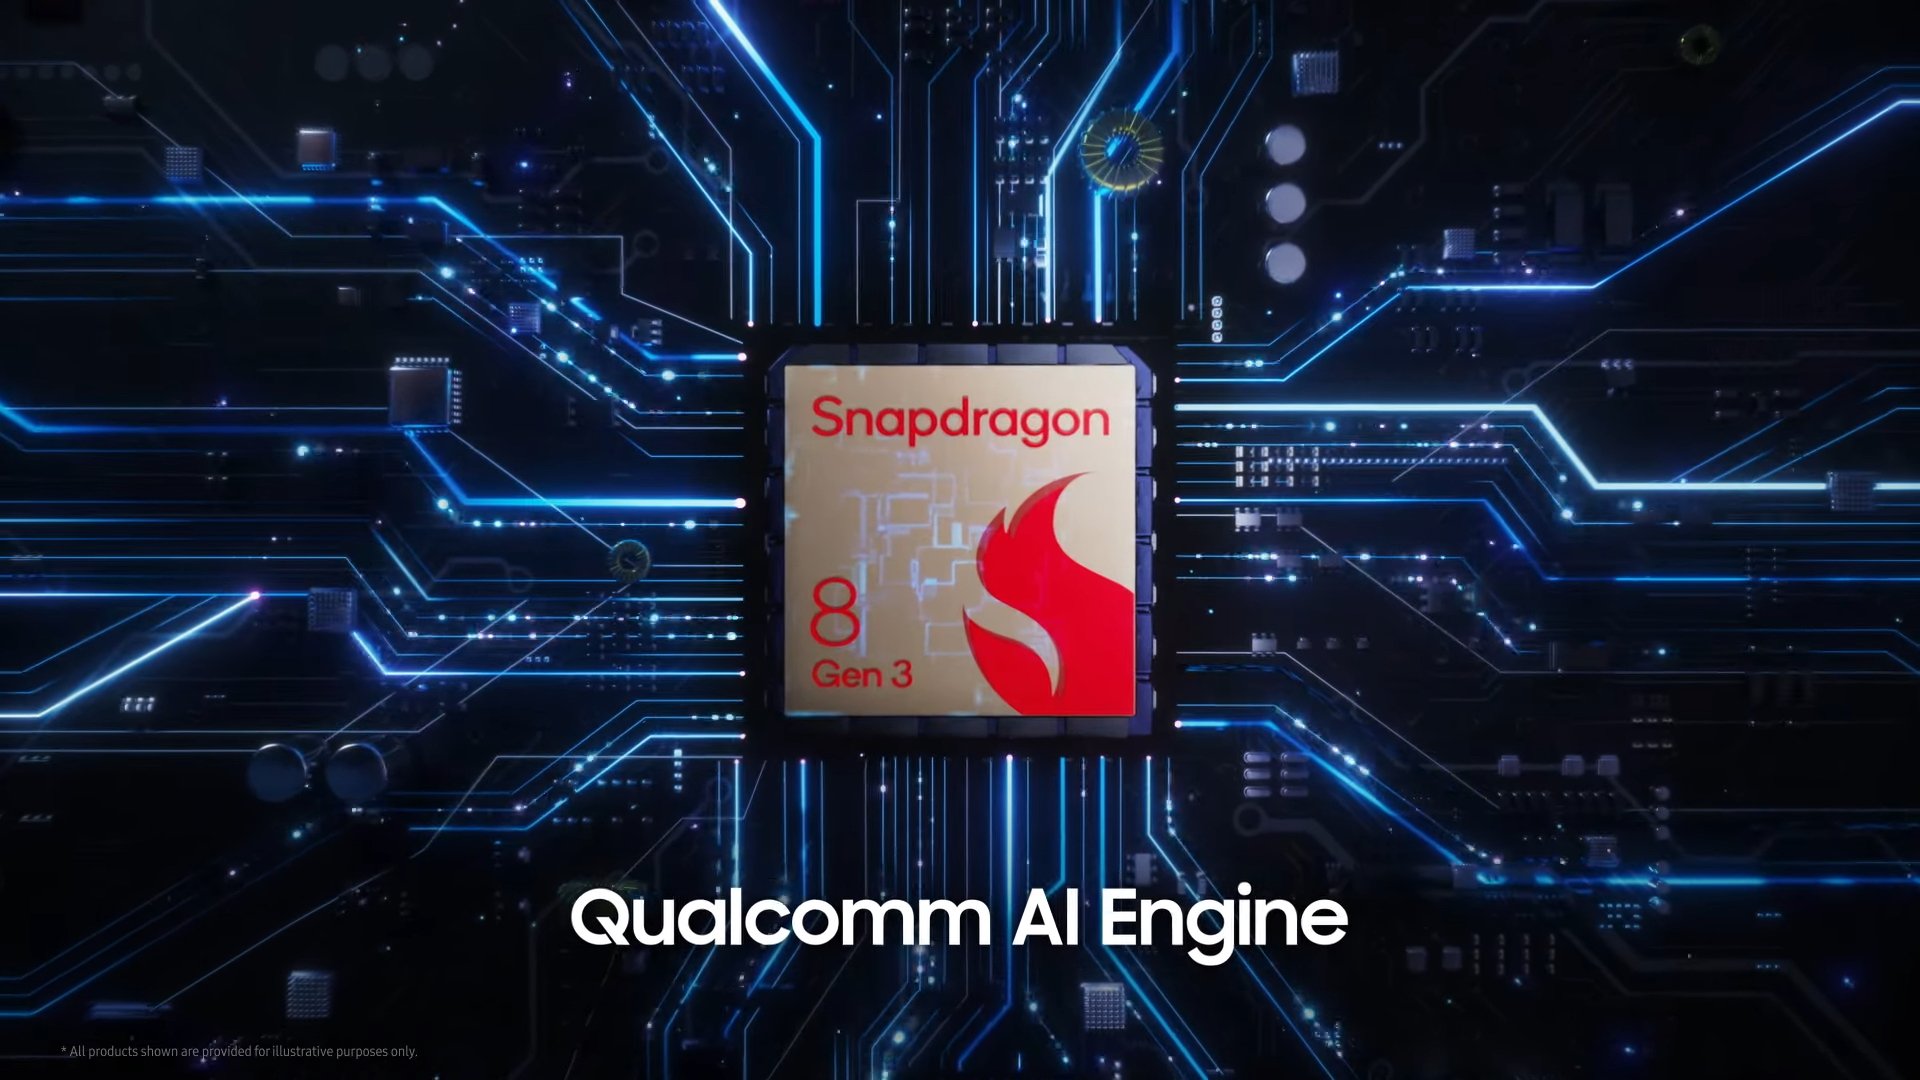 Samsung Galaxy S24's Snapdragon 8 Gen 3 For Galaxy is a faster